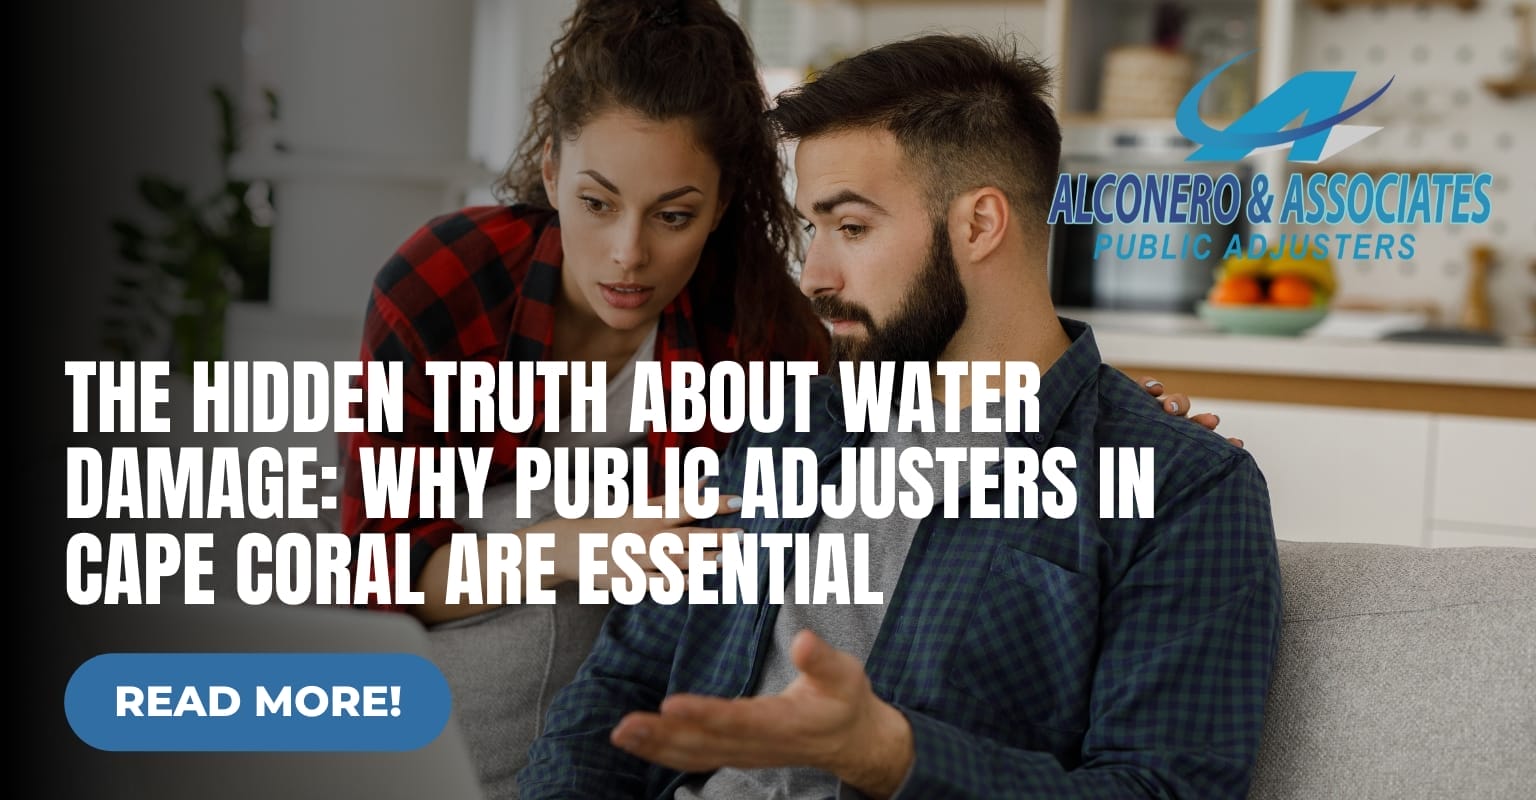 The Hidden Truth About Water Damage: Why Public Adjusters in Cape Coral Are Essential